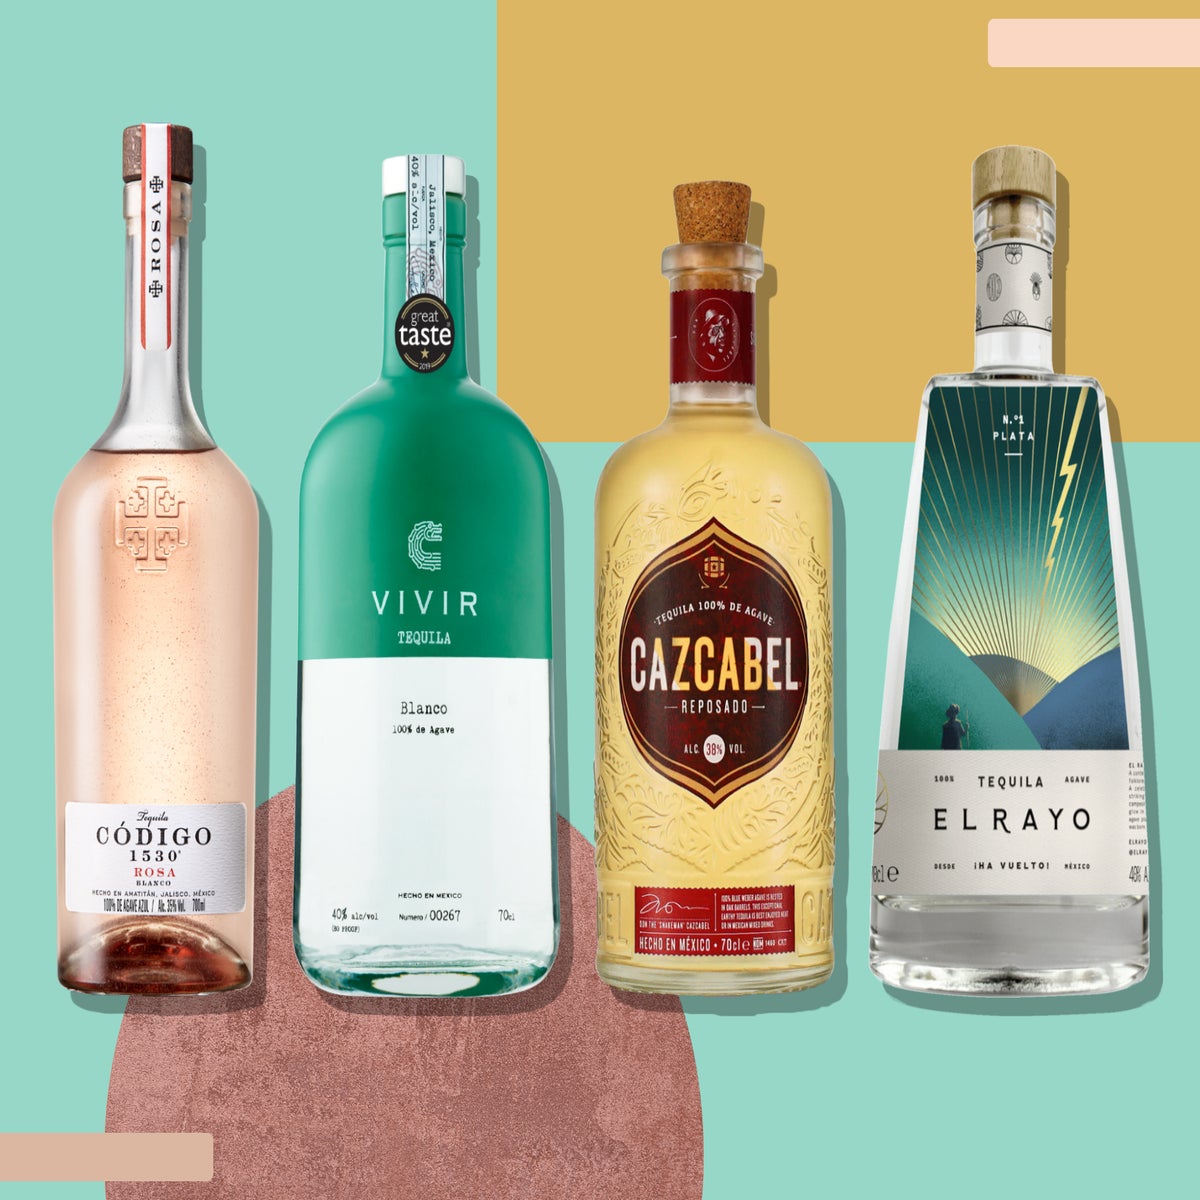 Compare prices for Blanco across all European  stores